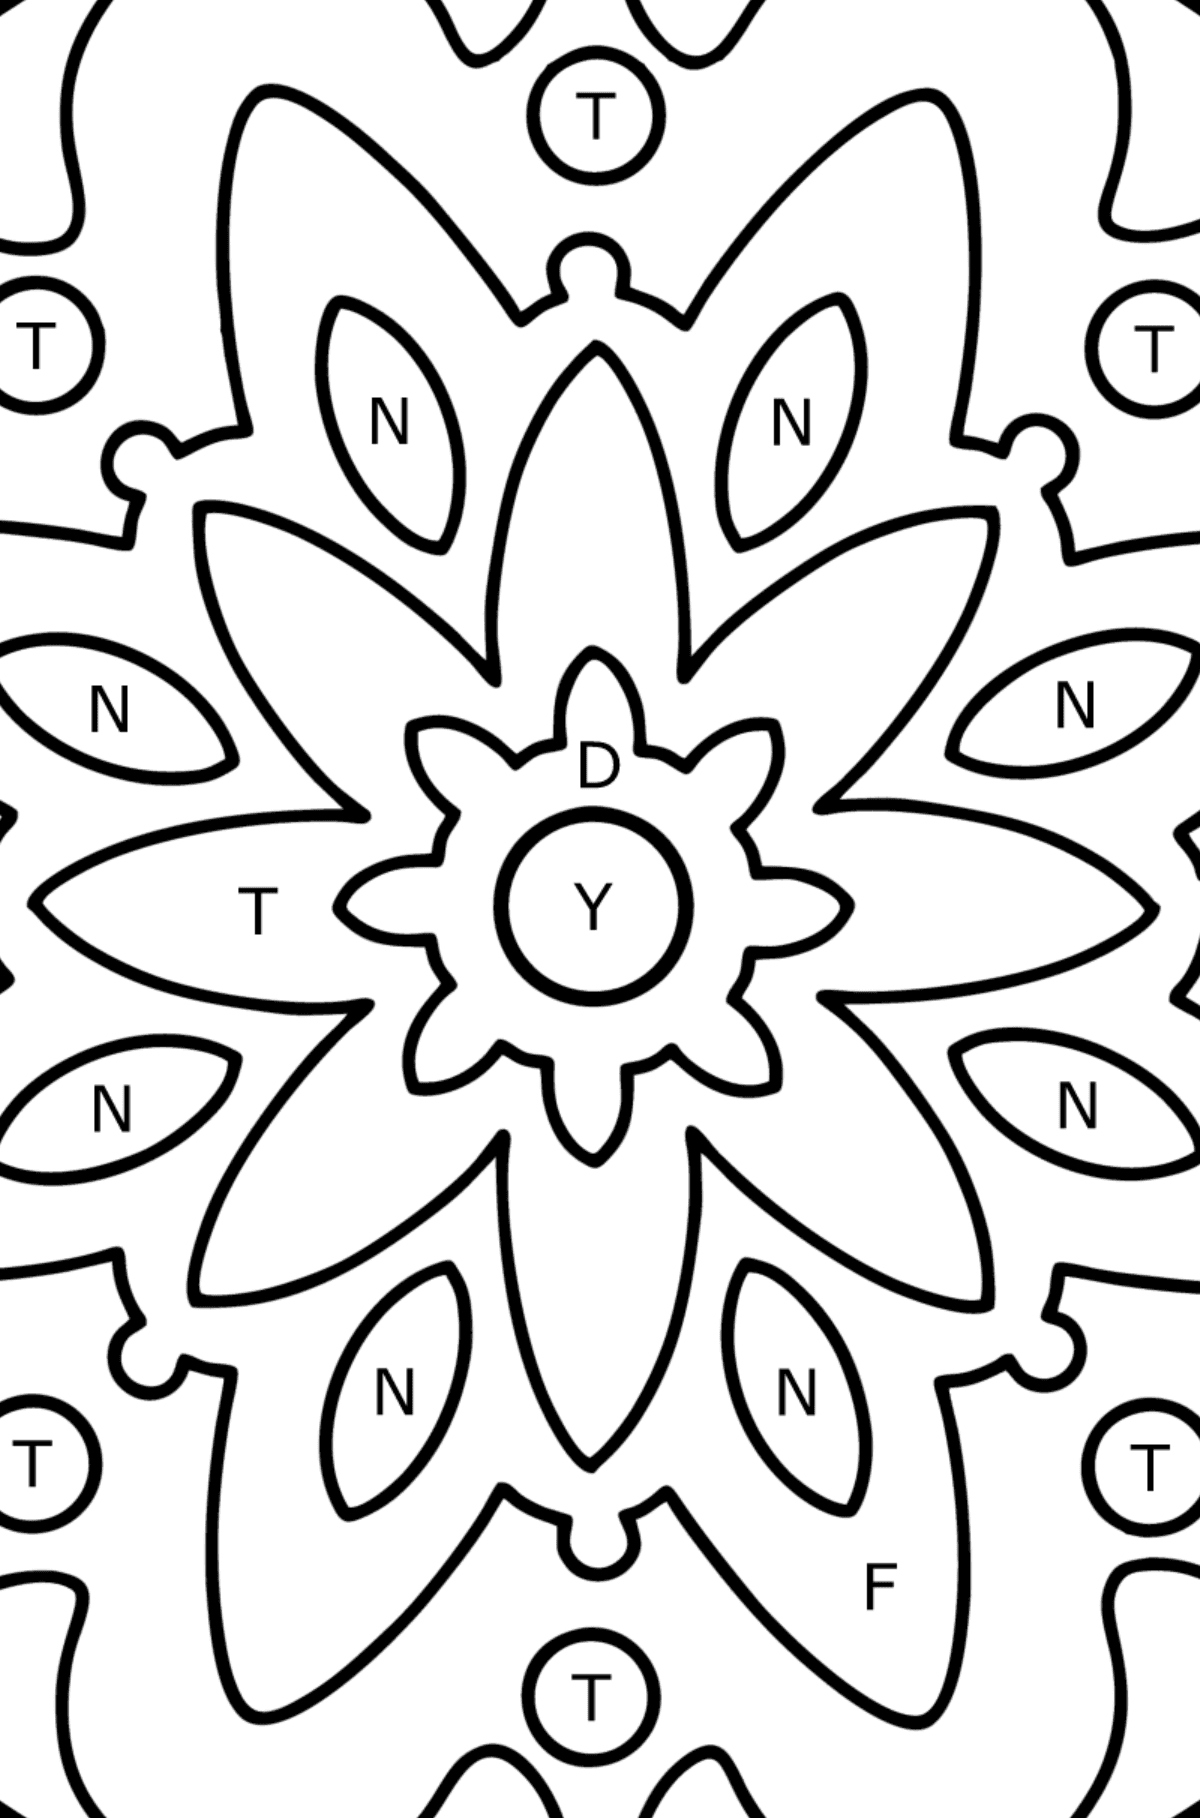 Mandala coloring page - 22 elements - Coloring by Letters for Kids